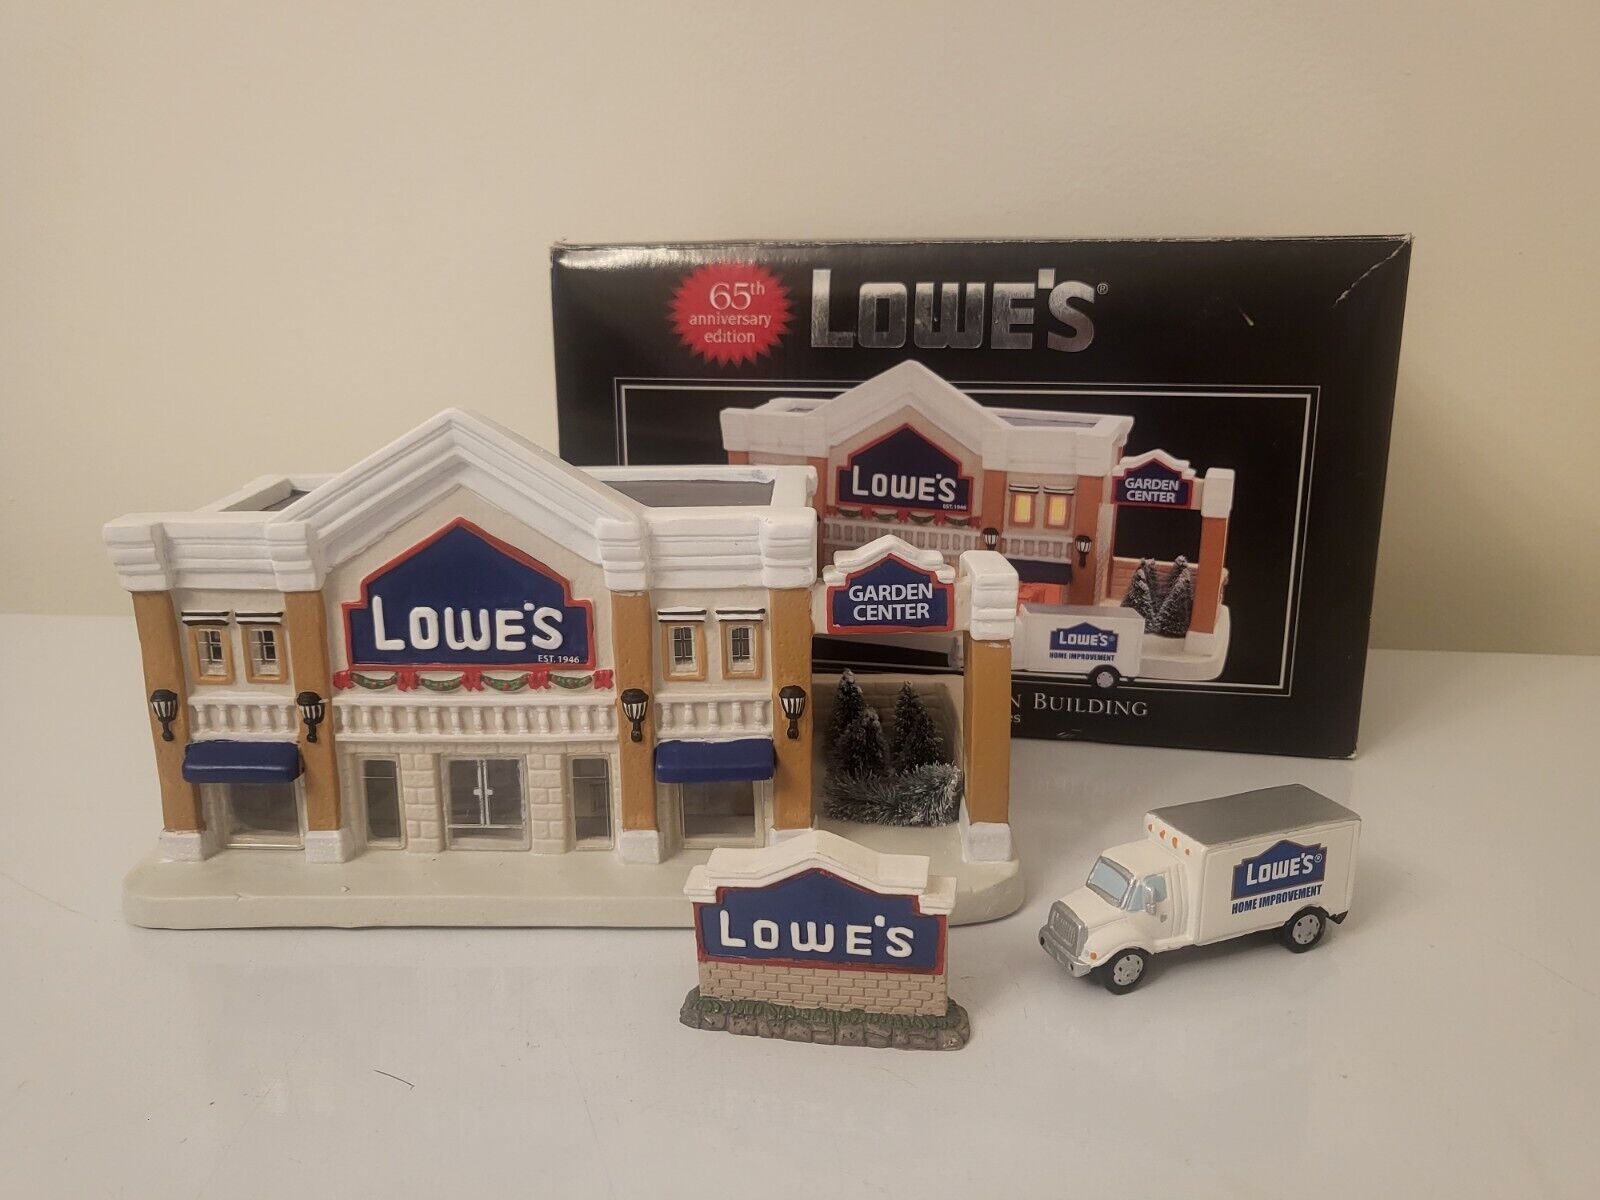 Lowes 65th Anniversary Edition Illuminated Porcelain Building with 2 Accessories